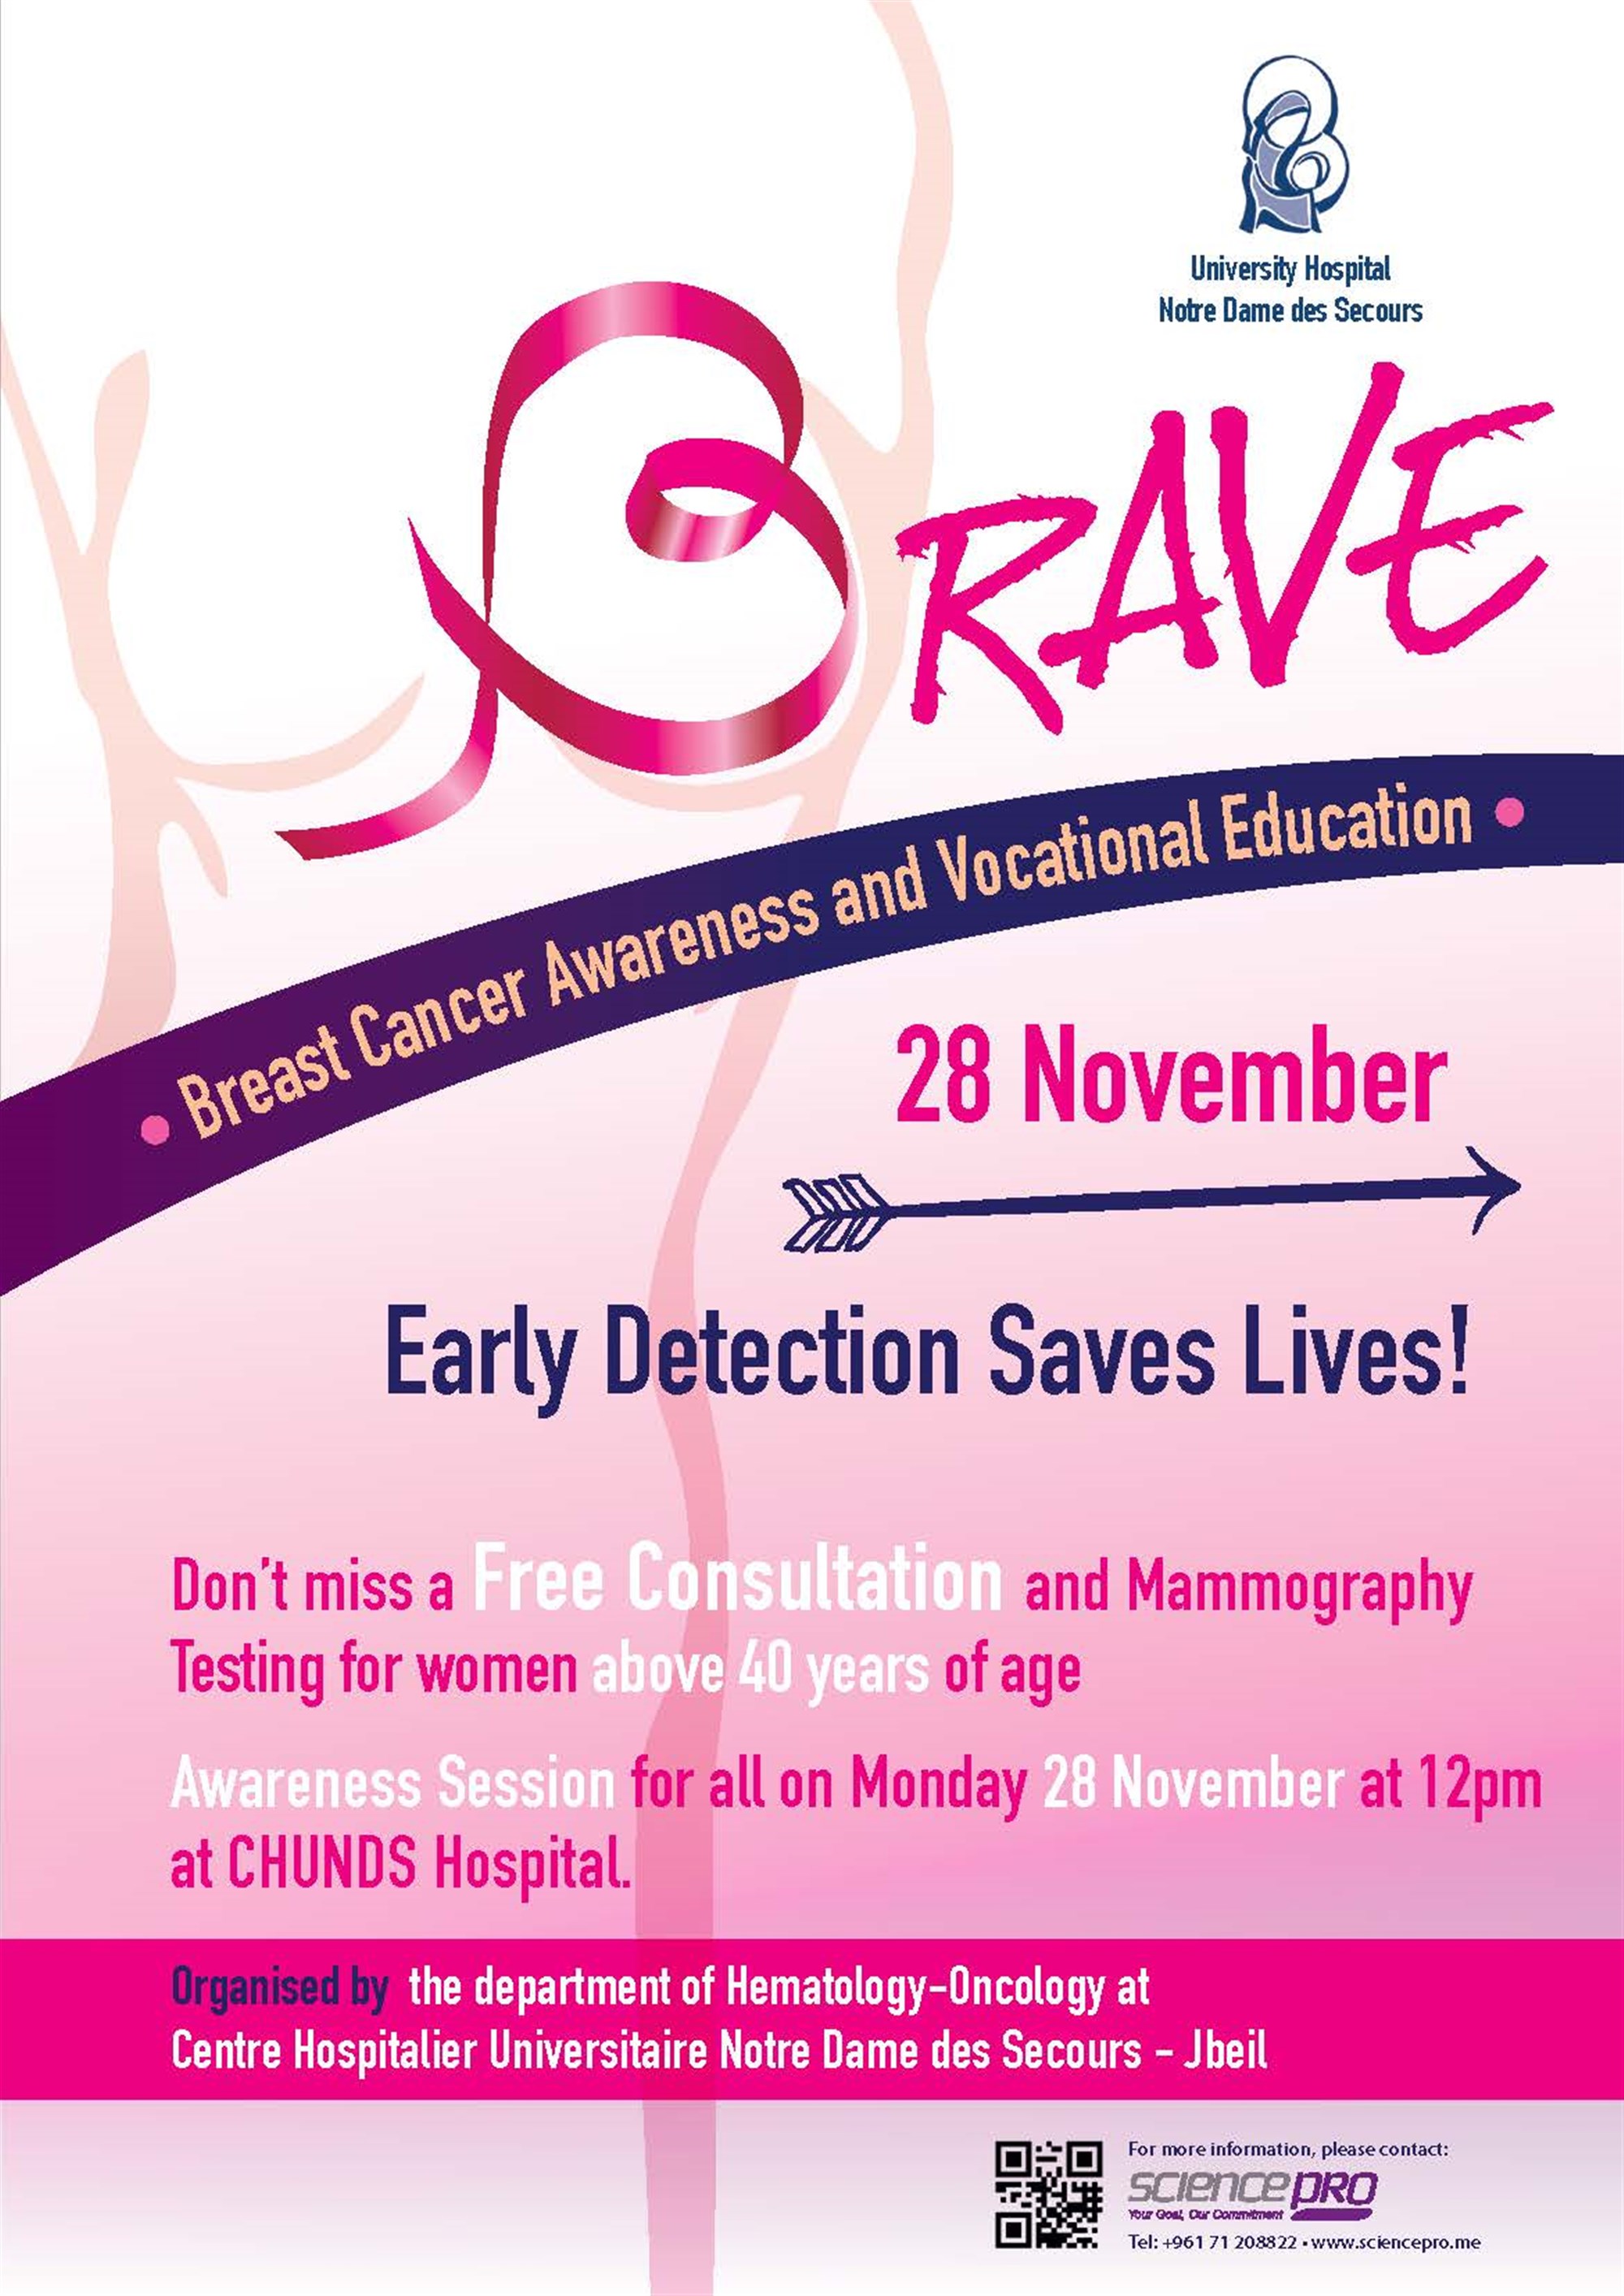 Breast cancer awareness campaign "BRAVE"